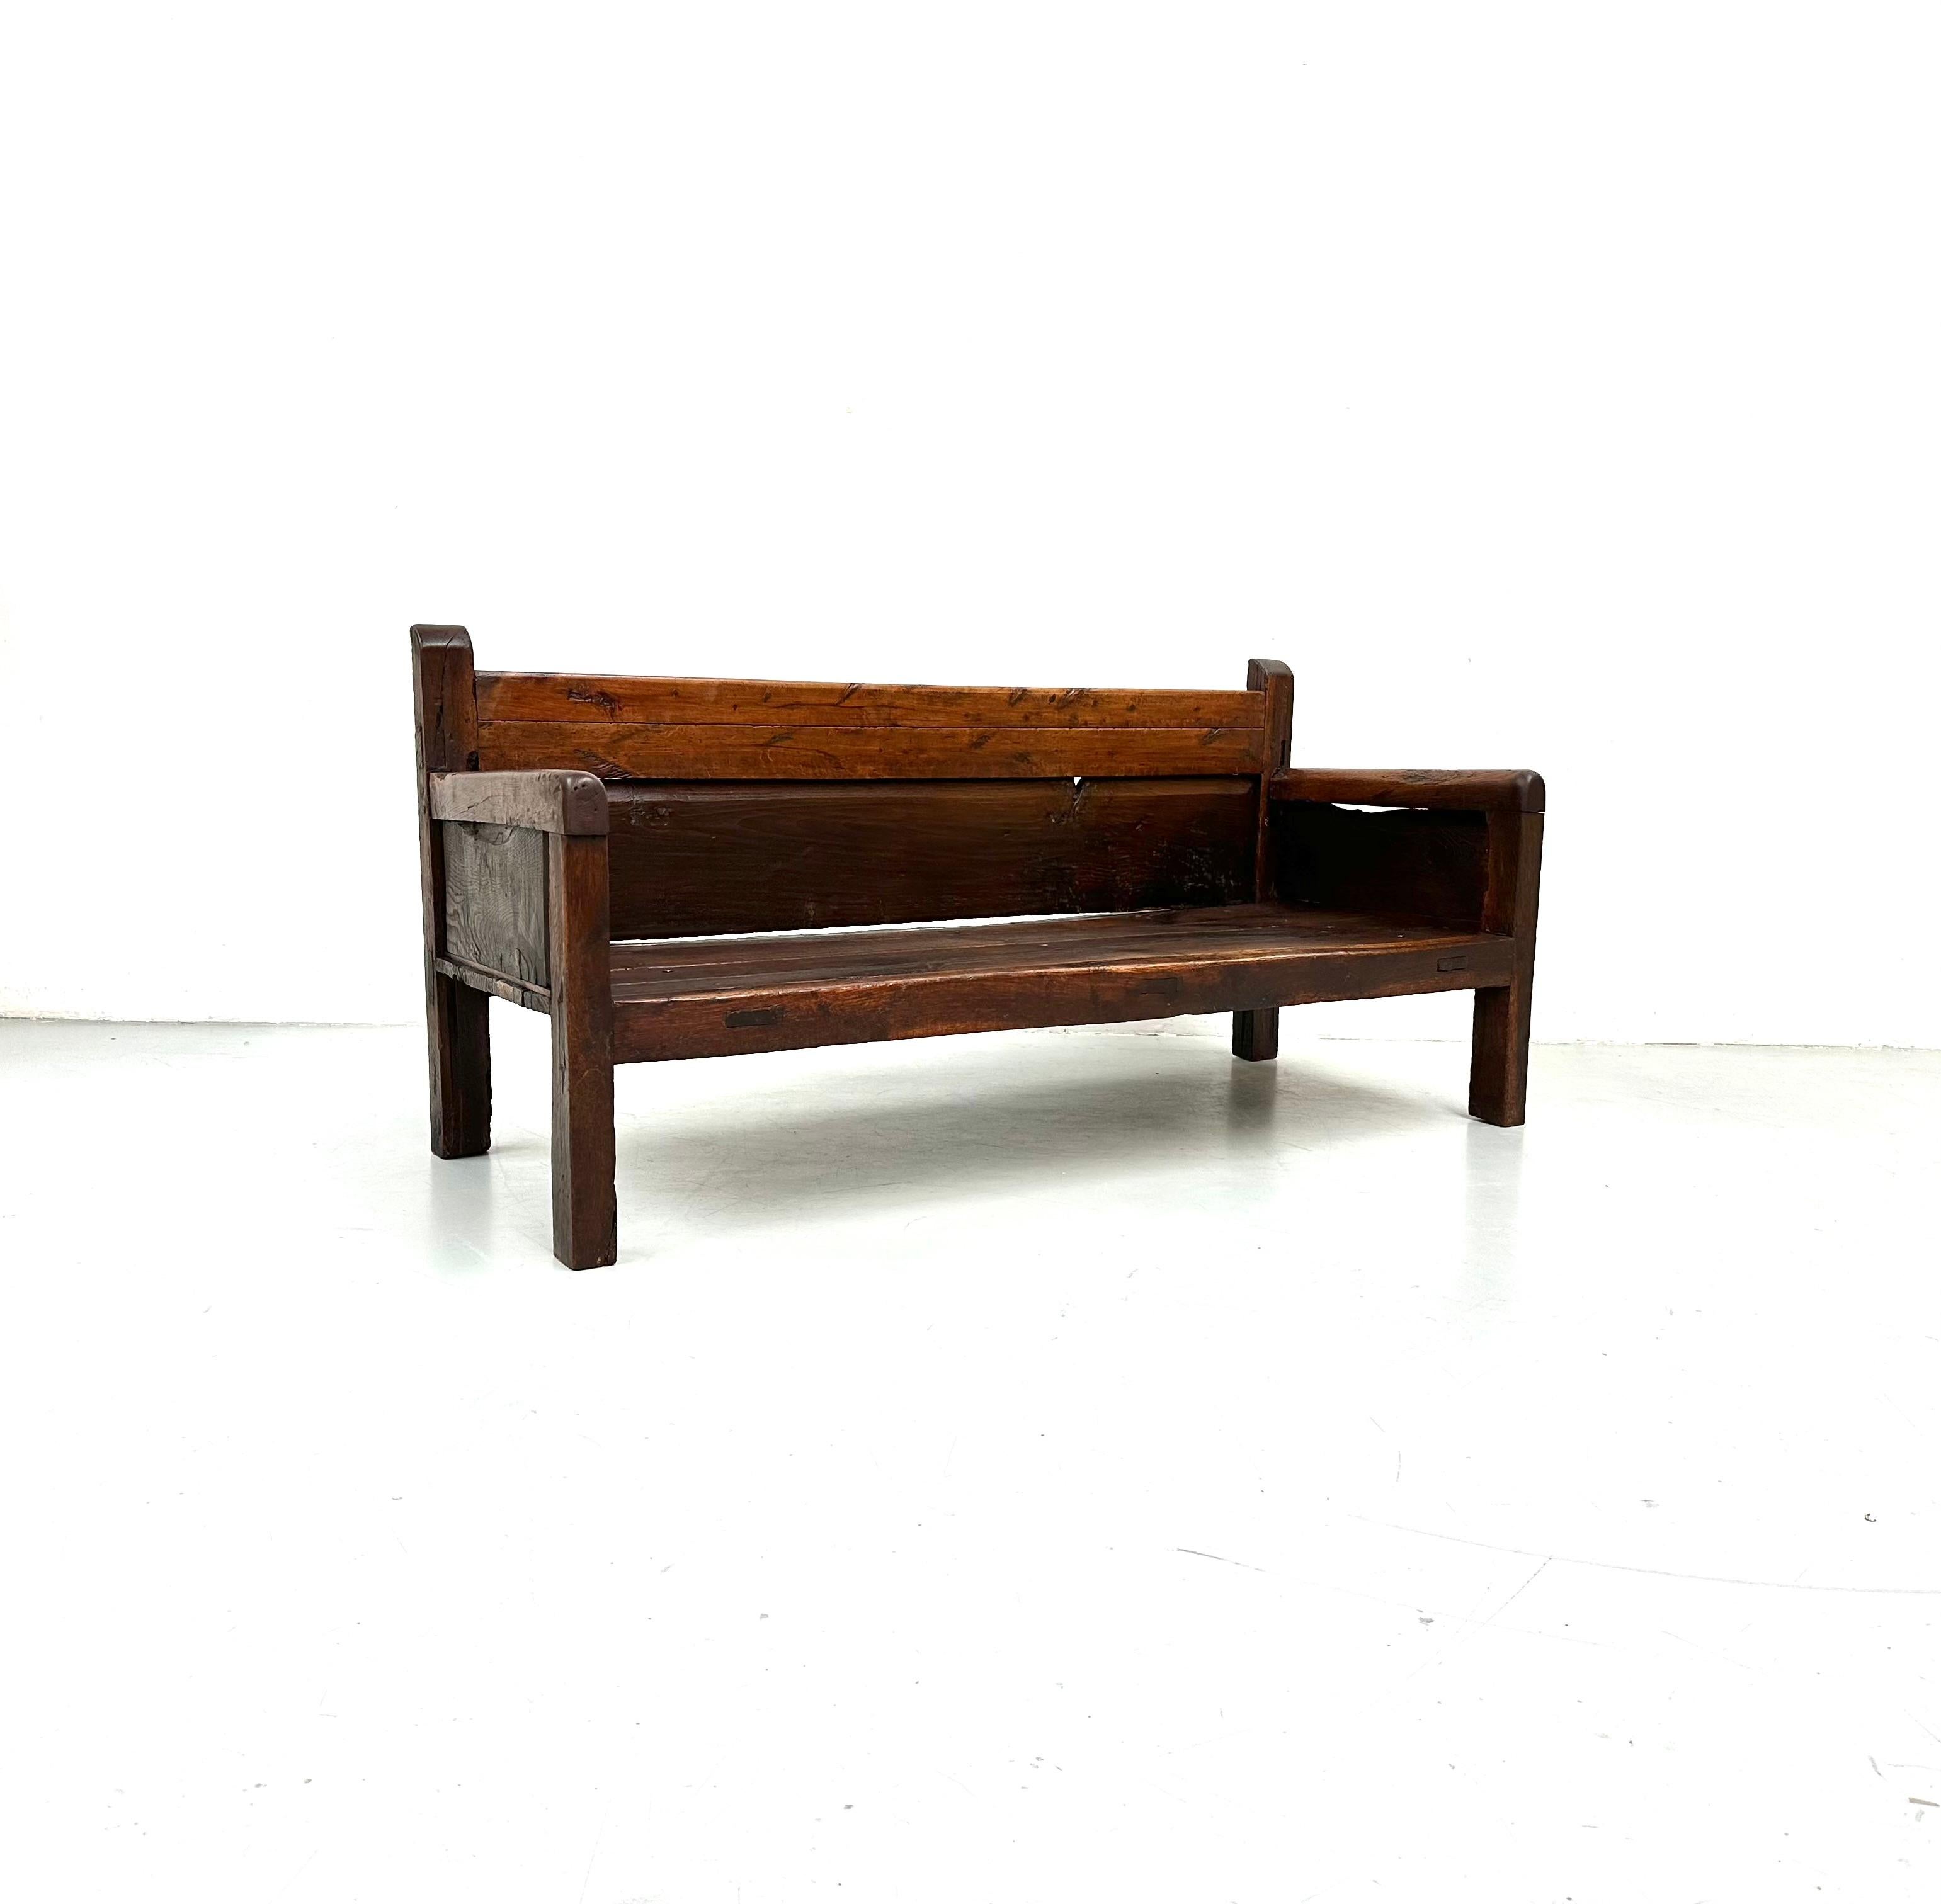 Antique Handmade Minimalistic Spanish Chestnut Wood Bench, Early 19th Century For Sale 7